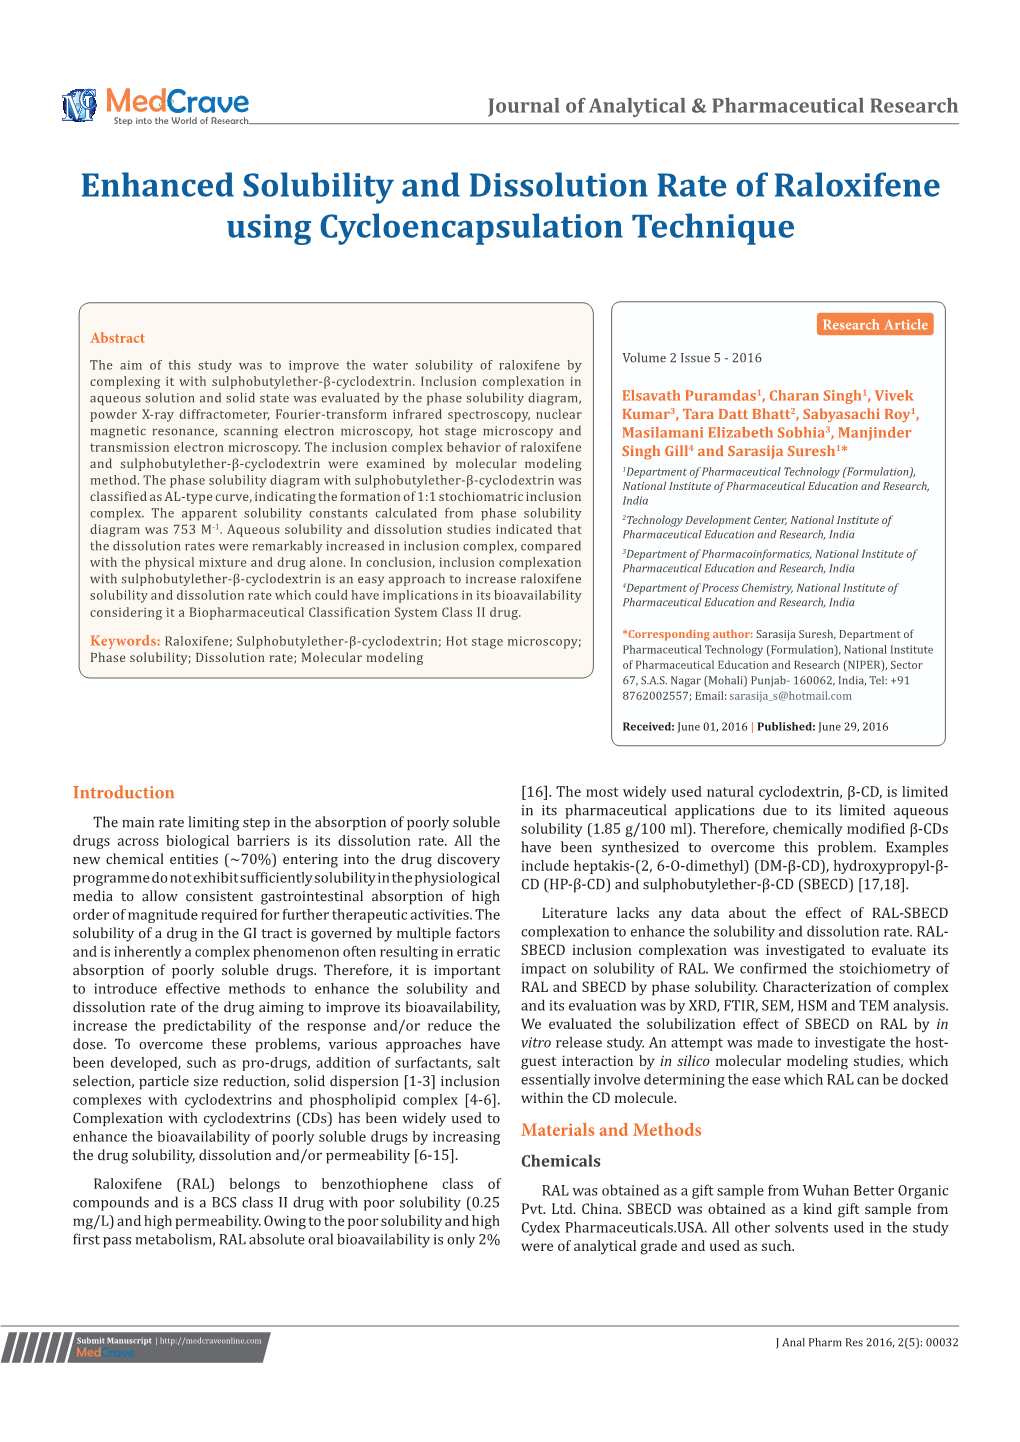 Enhanced Solubility and Dissolution Rate of Raloxifene Using Cycloencapsulation Technique